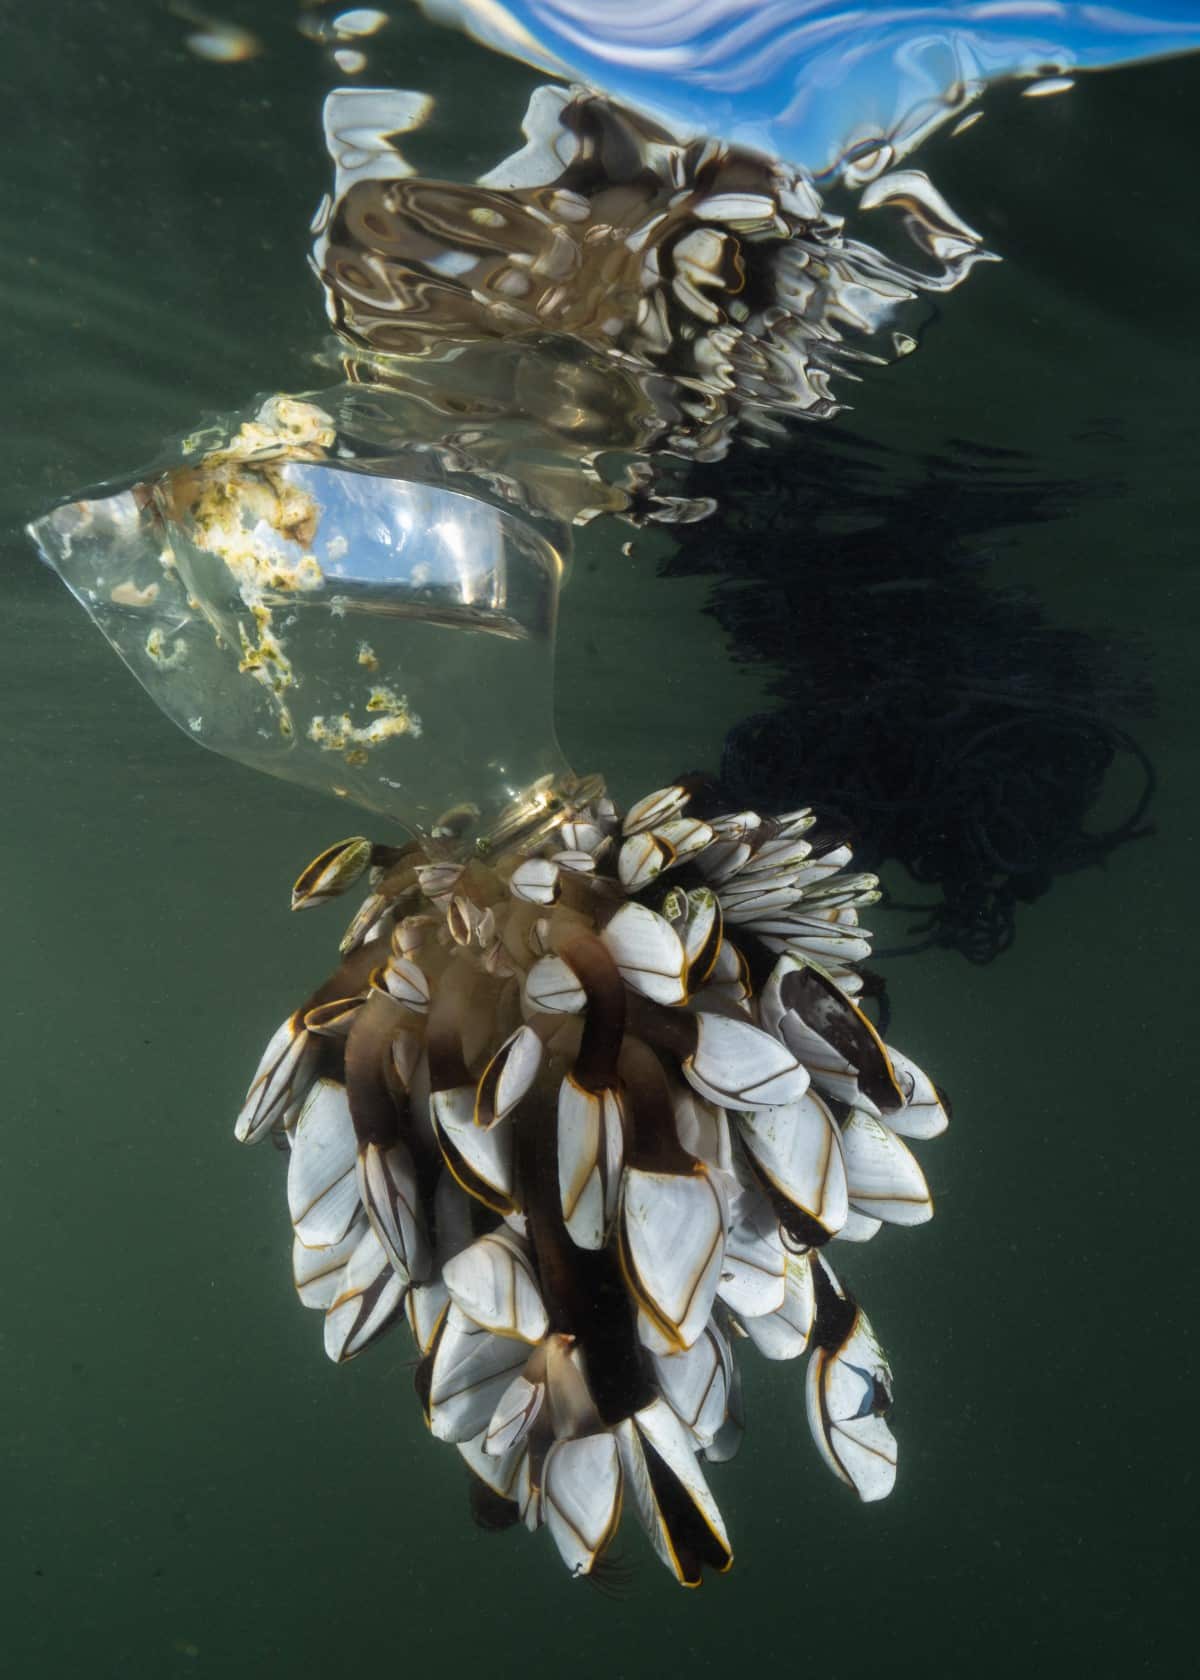 Plastic bottle with gooseneck barnacles attached